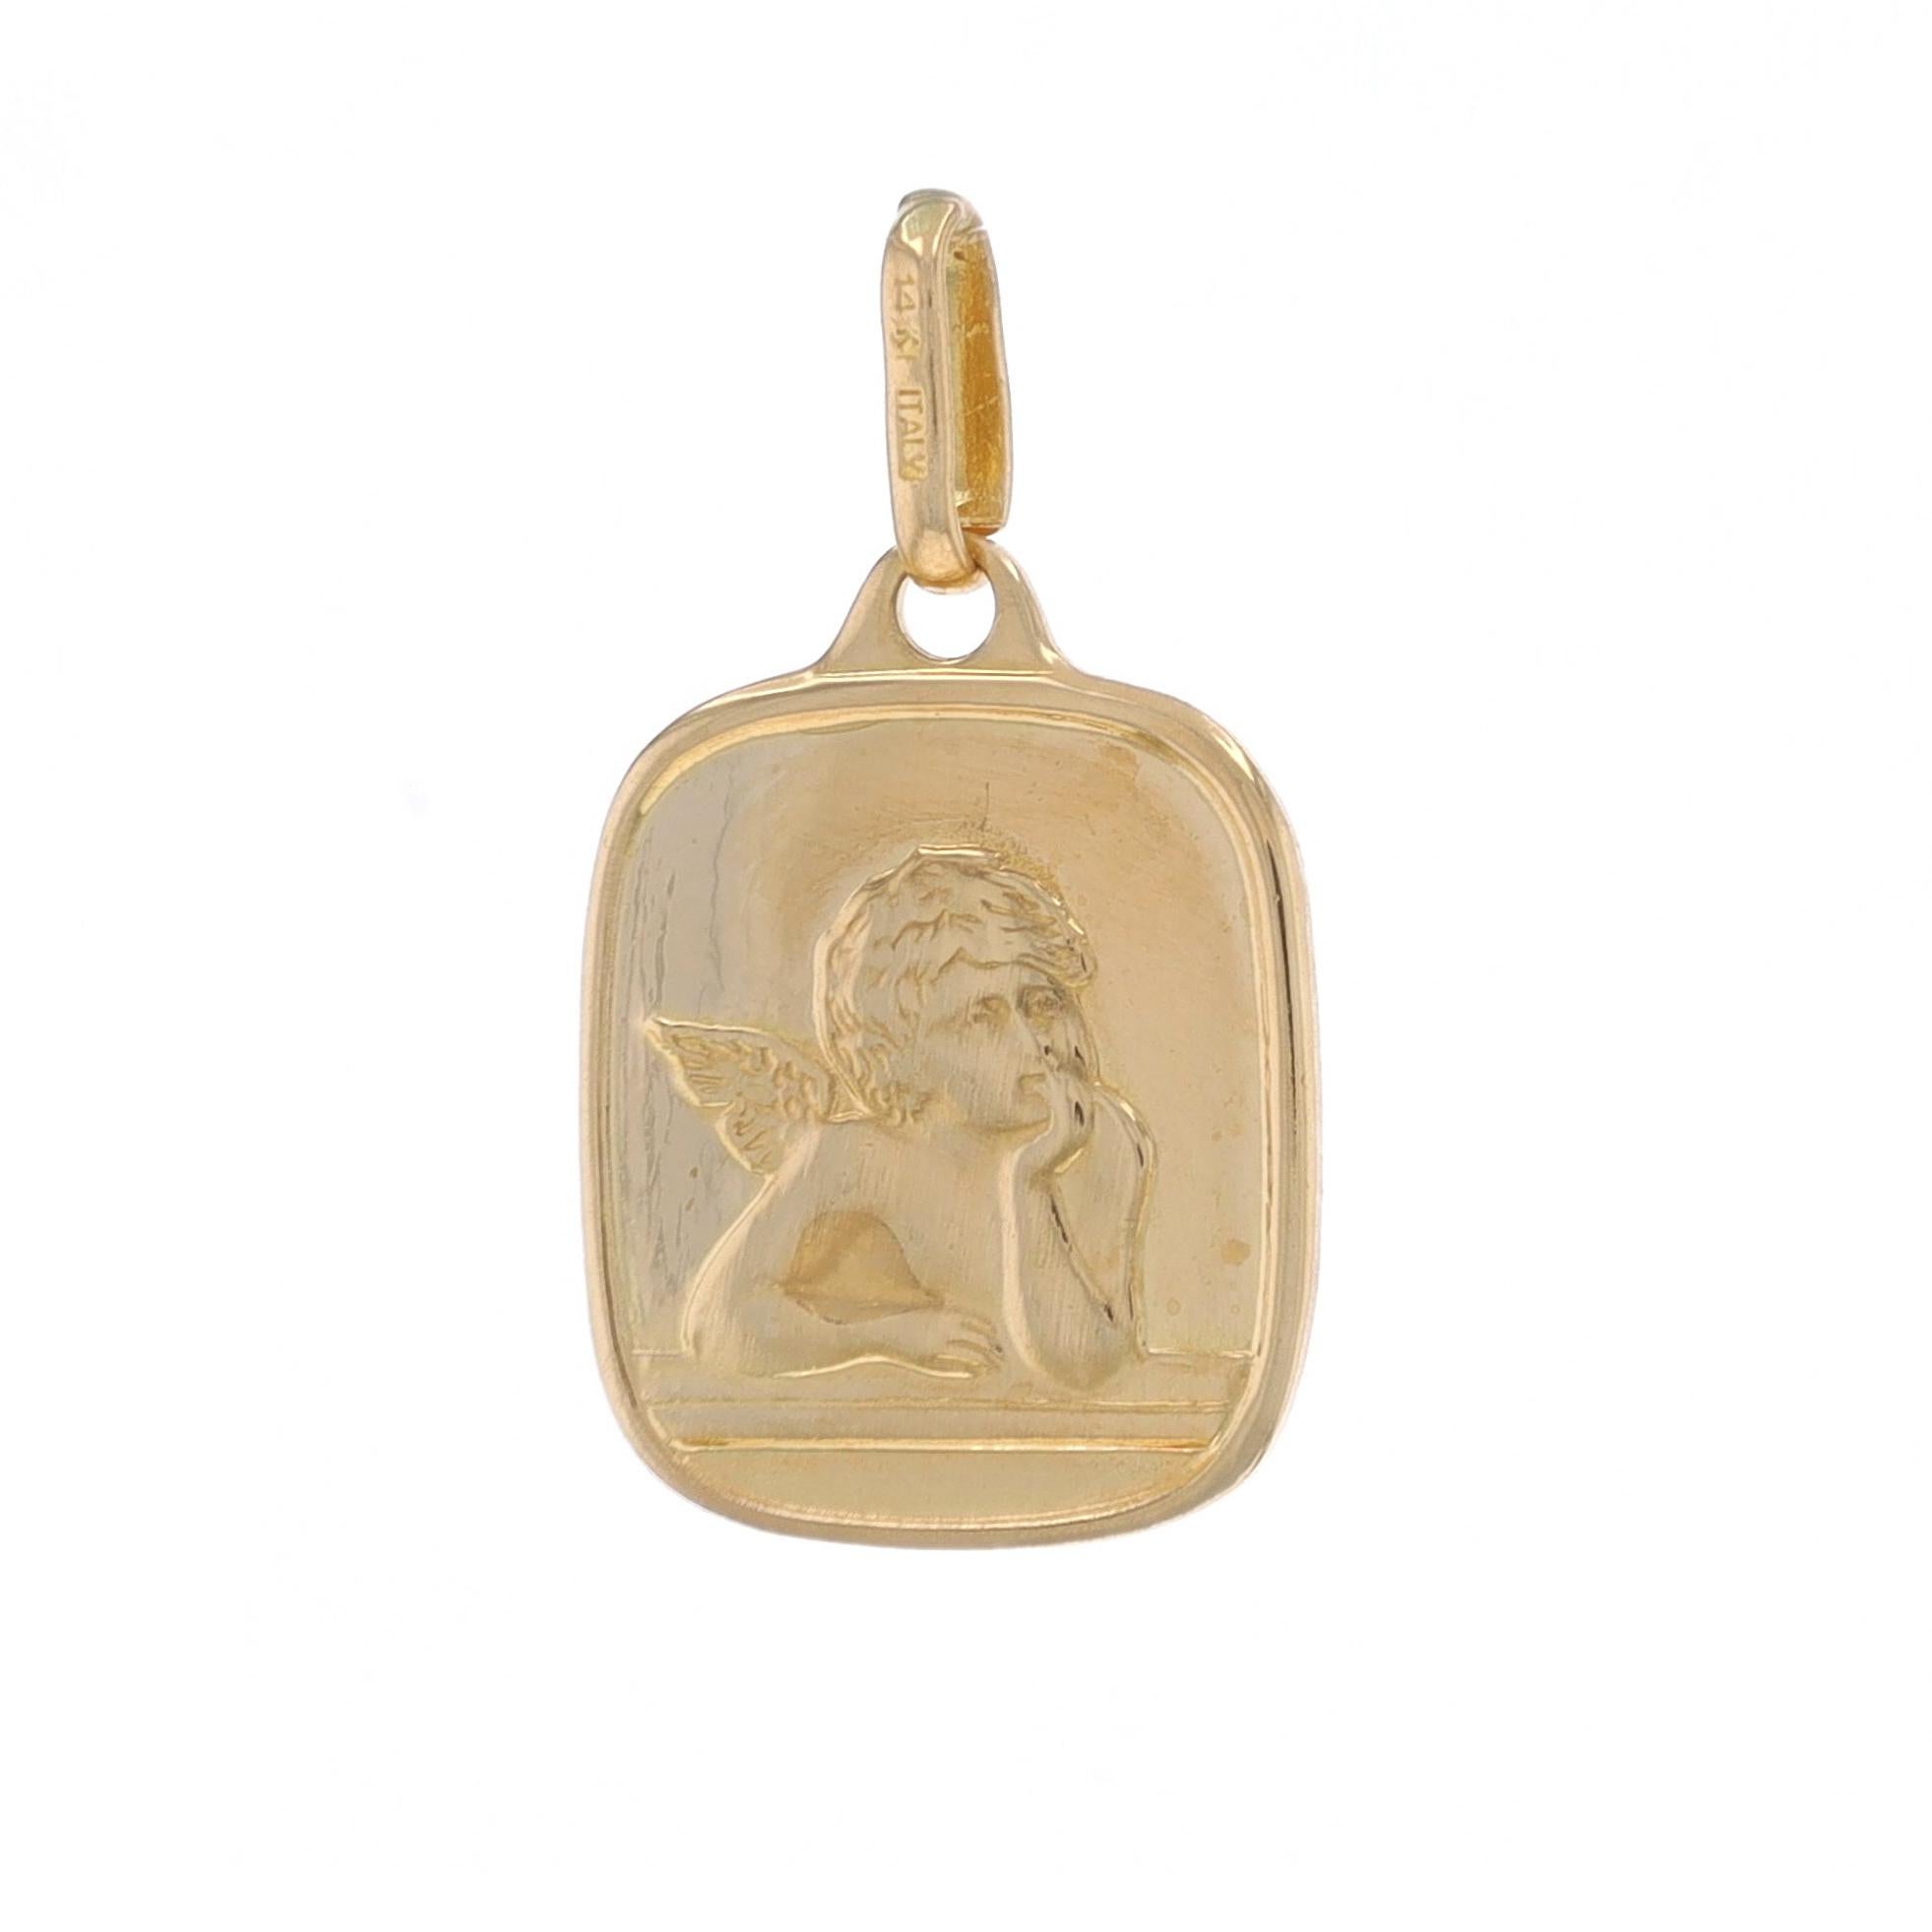 Metal Content: 14k Yellow Gold

Theme: Pondering Cherub, Guardian Angel, Faith

Measurements

Tall (from stationary bail): 23/32